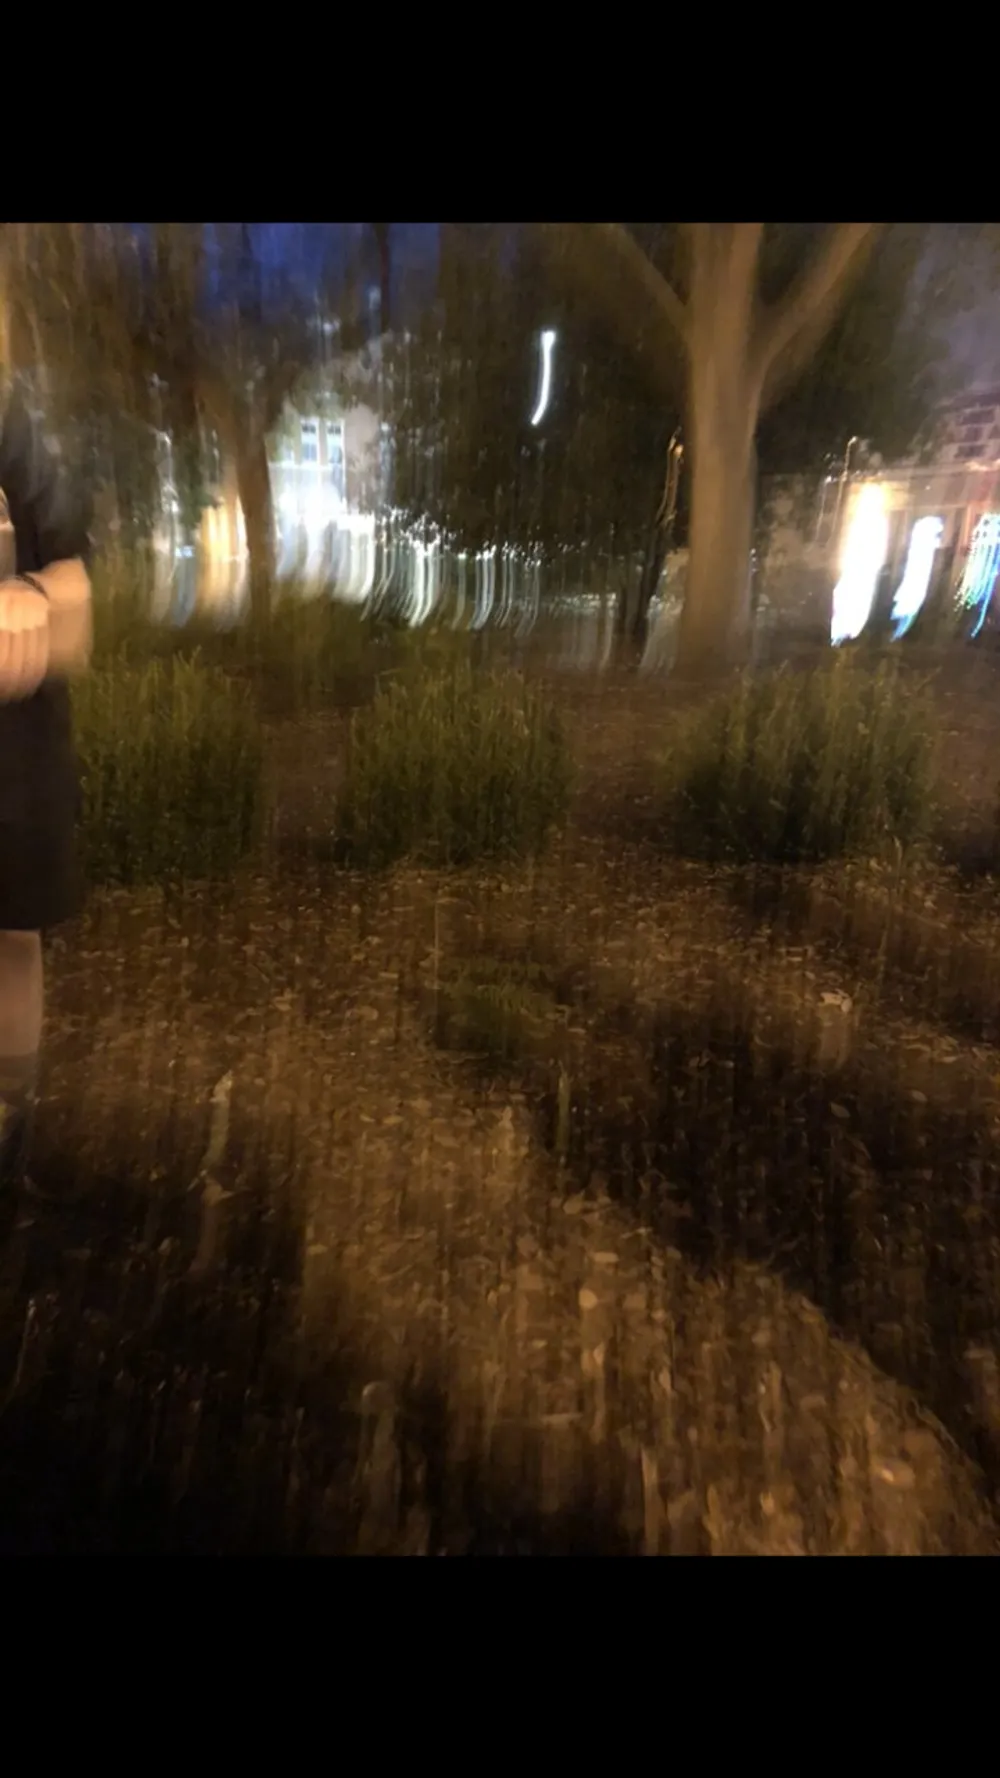 The image is a blurred nighttime scene possibly depicting an outdoor environment with lights streaking due to camera movement